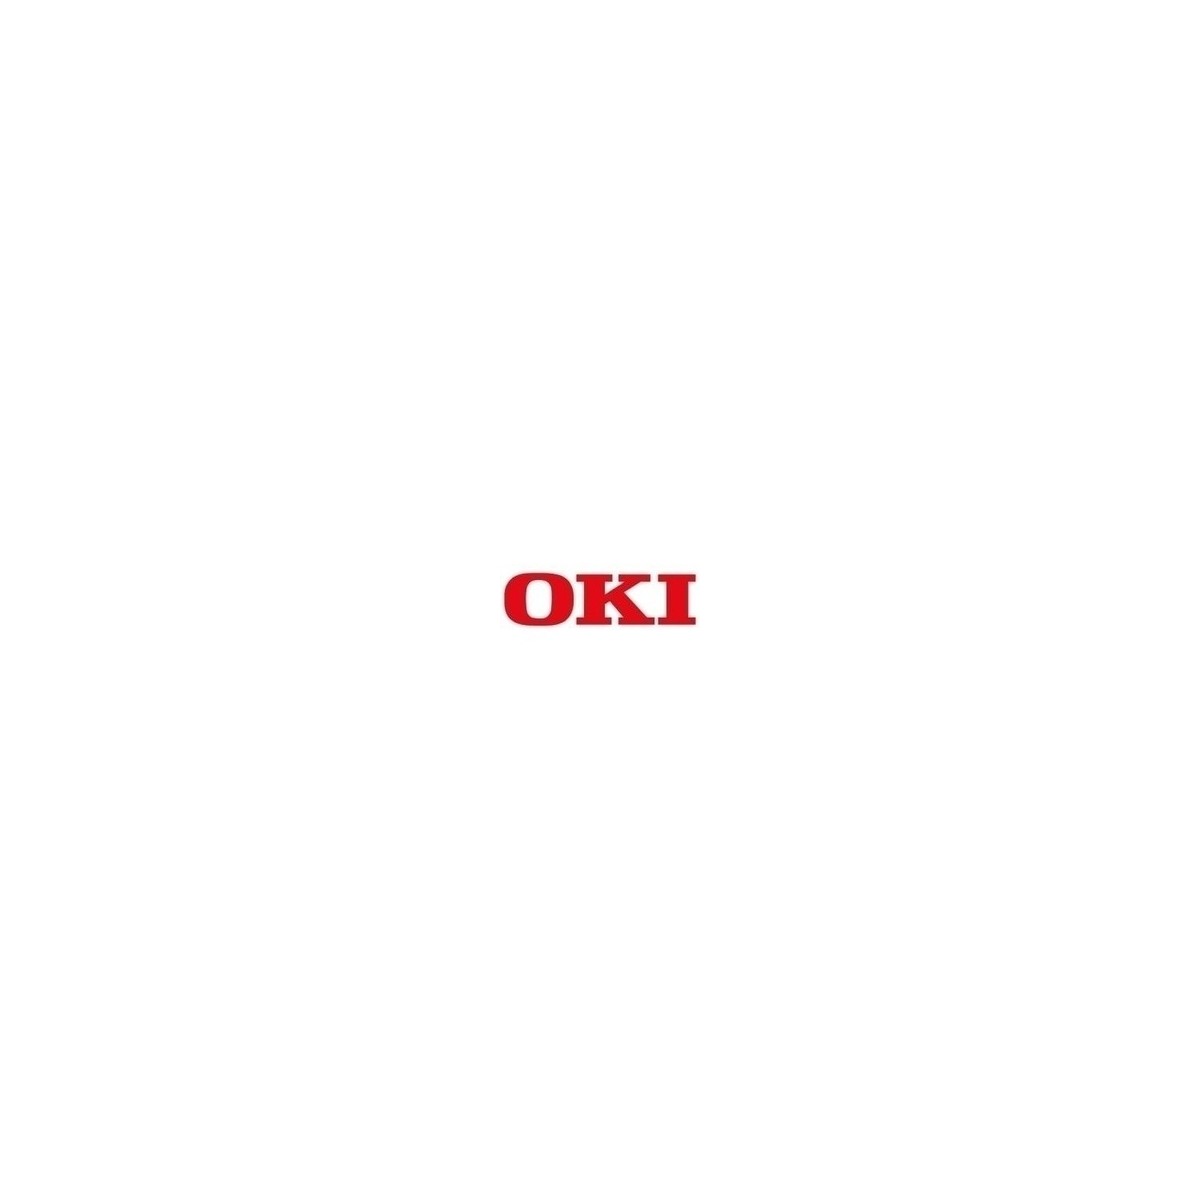 OKI Toner ES2232a4 Yellow - 6000 pages - Yellow